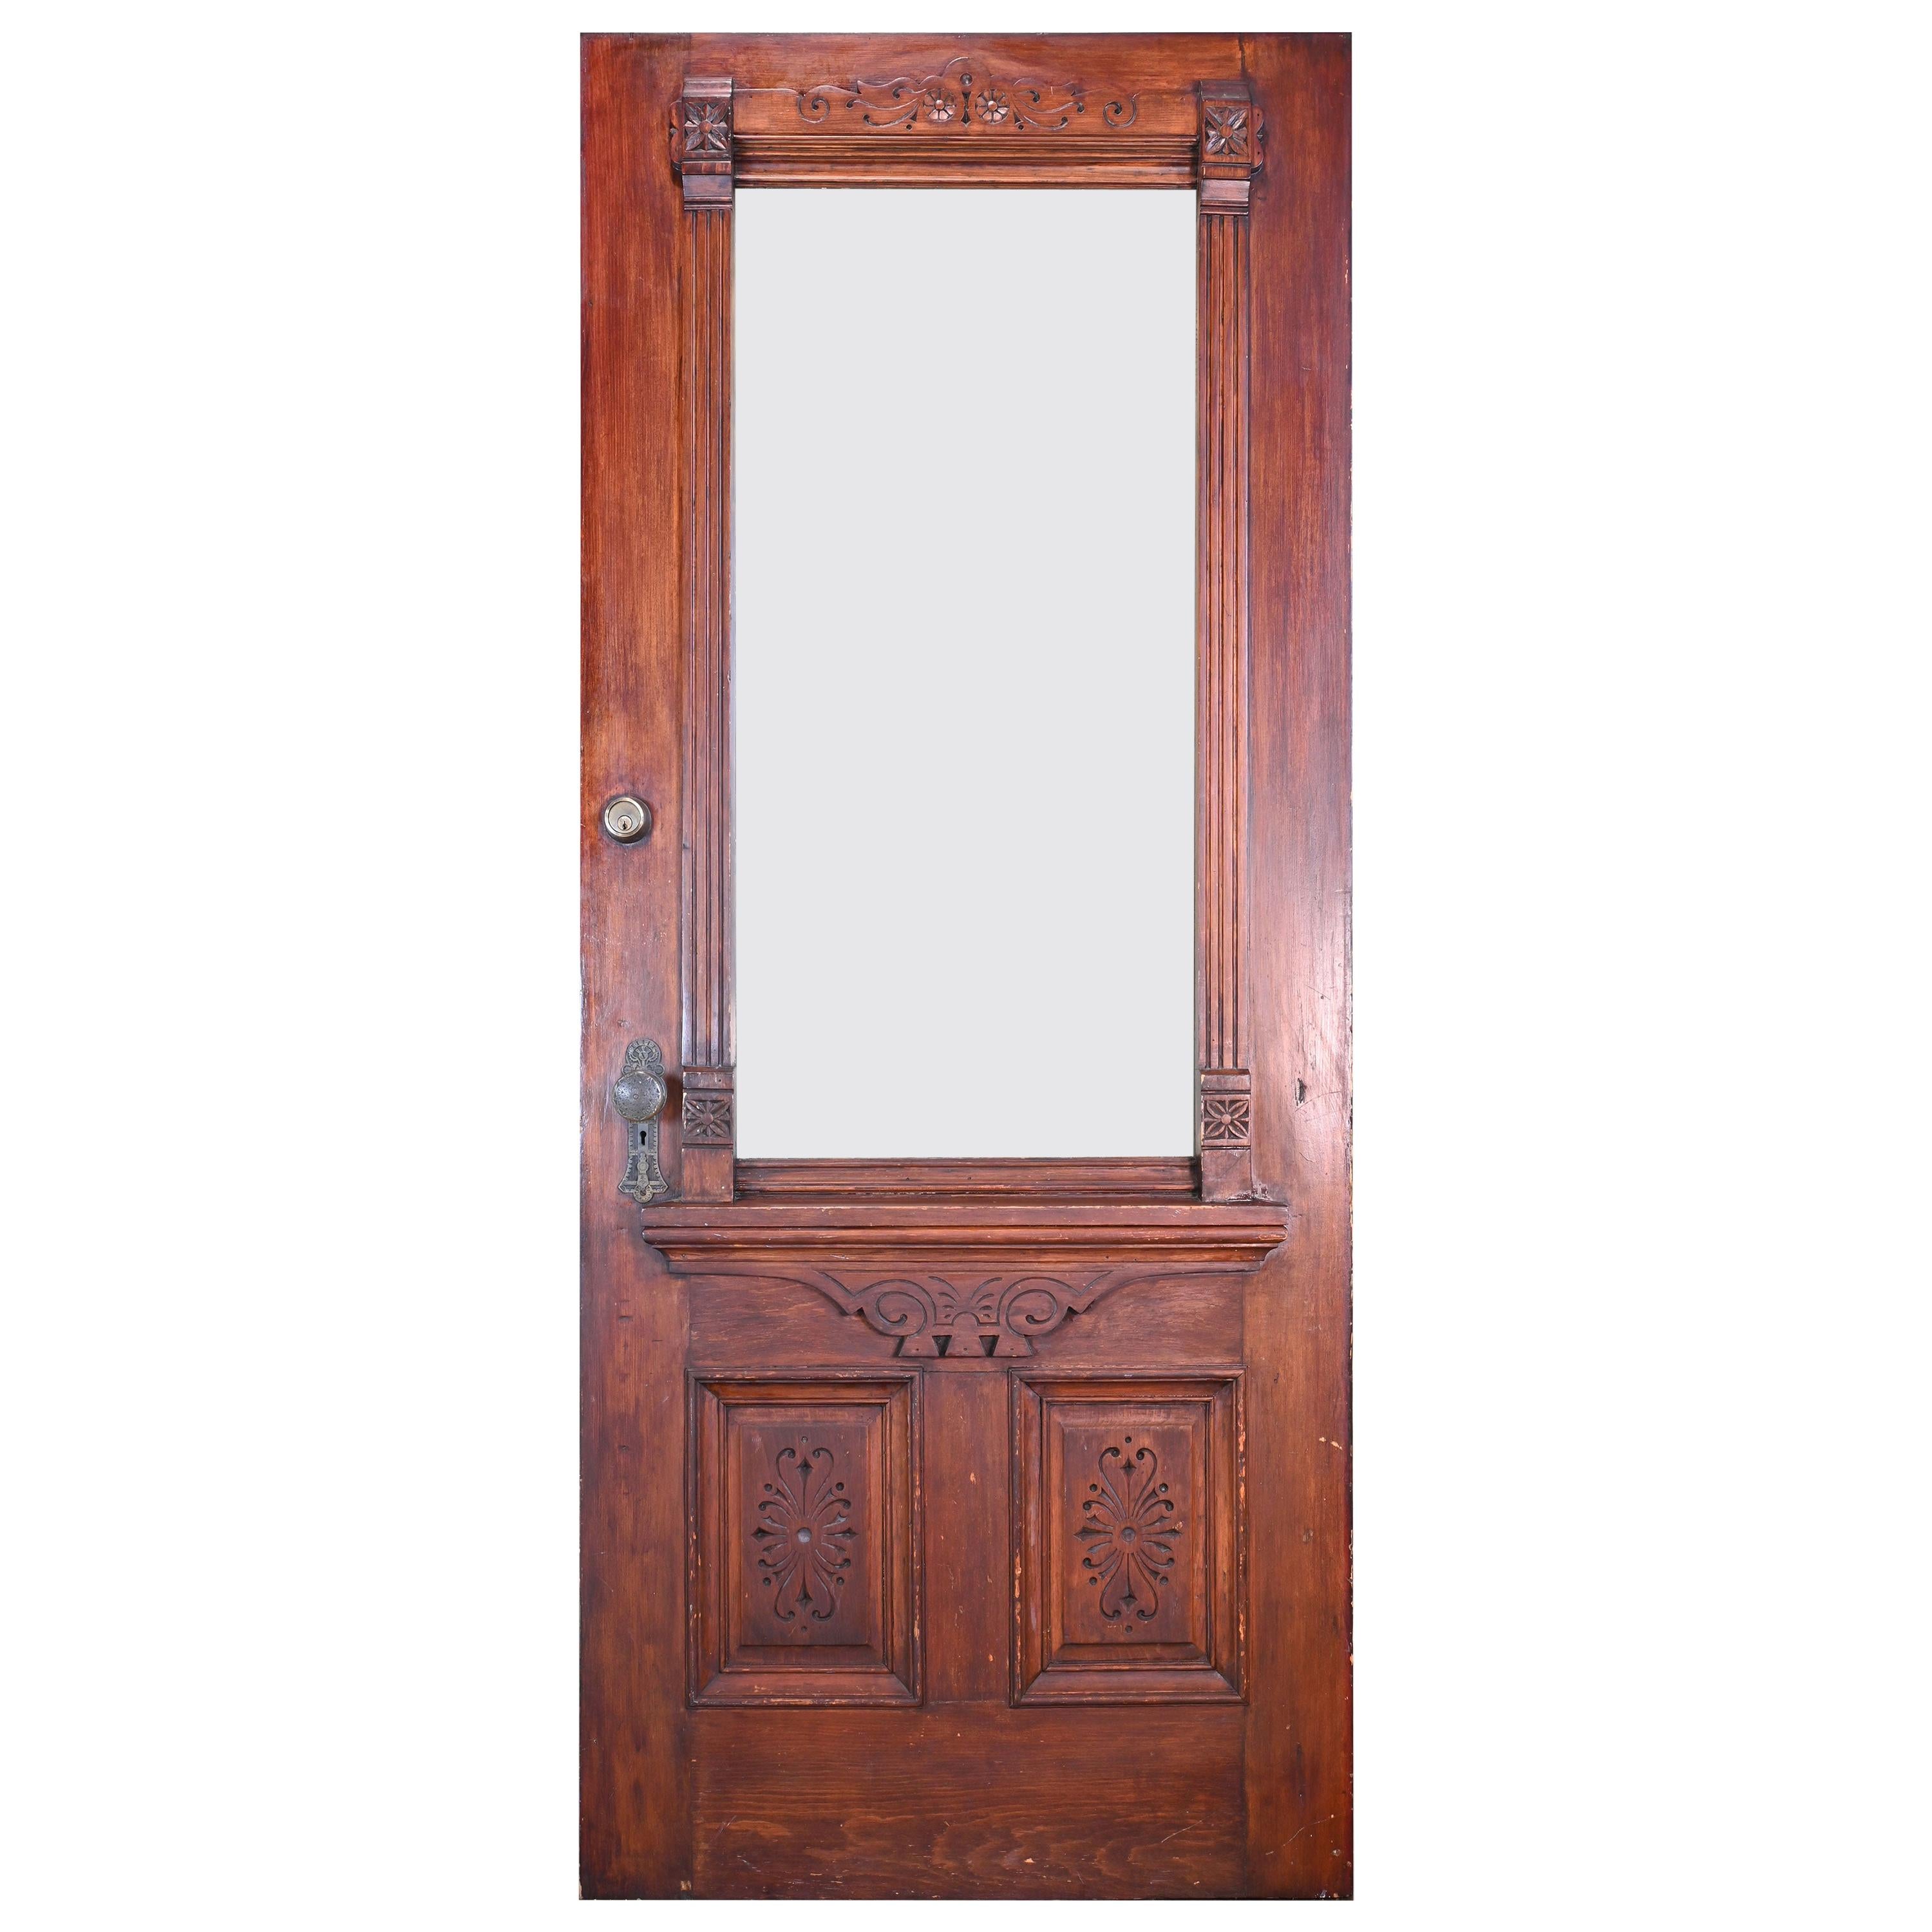 Eastlake Door with Beveled Glass Window and Jamb with Transom